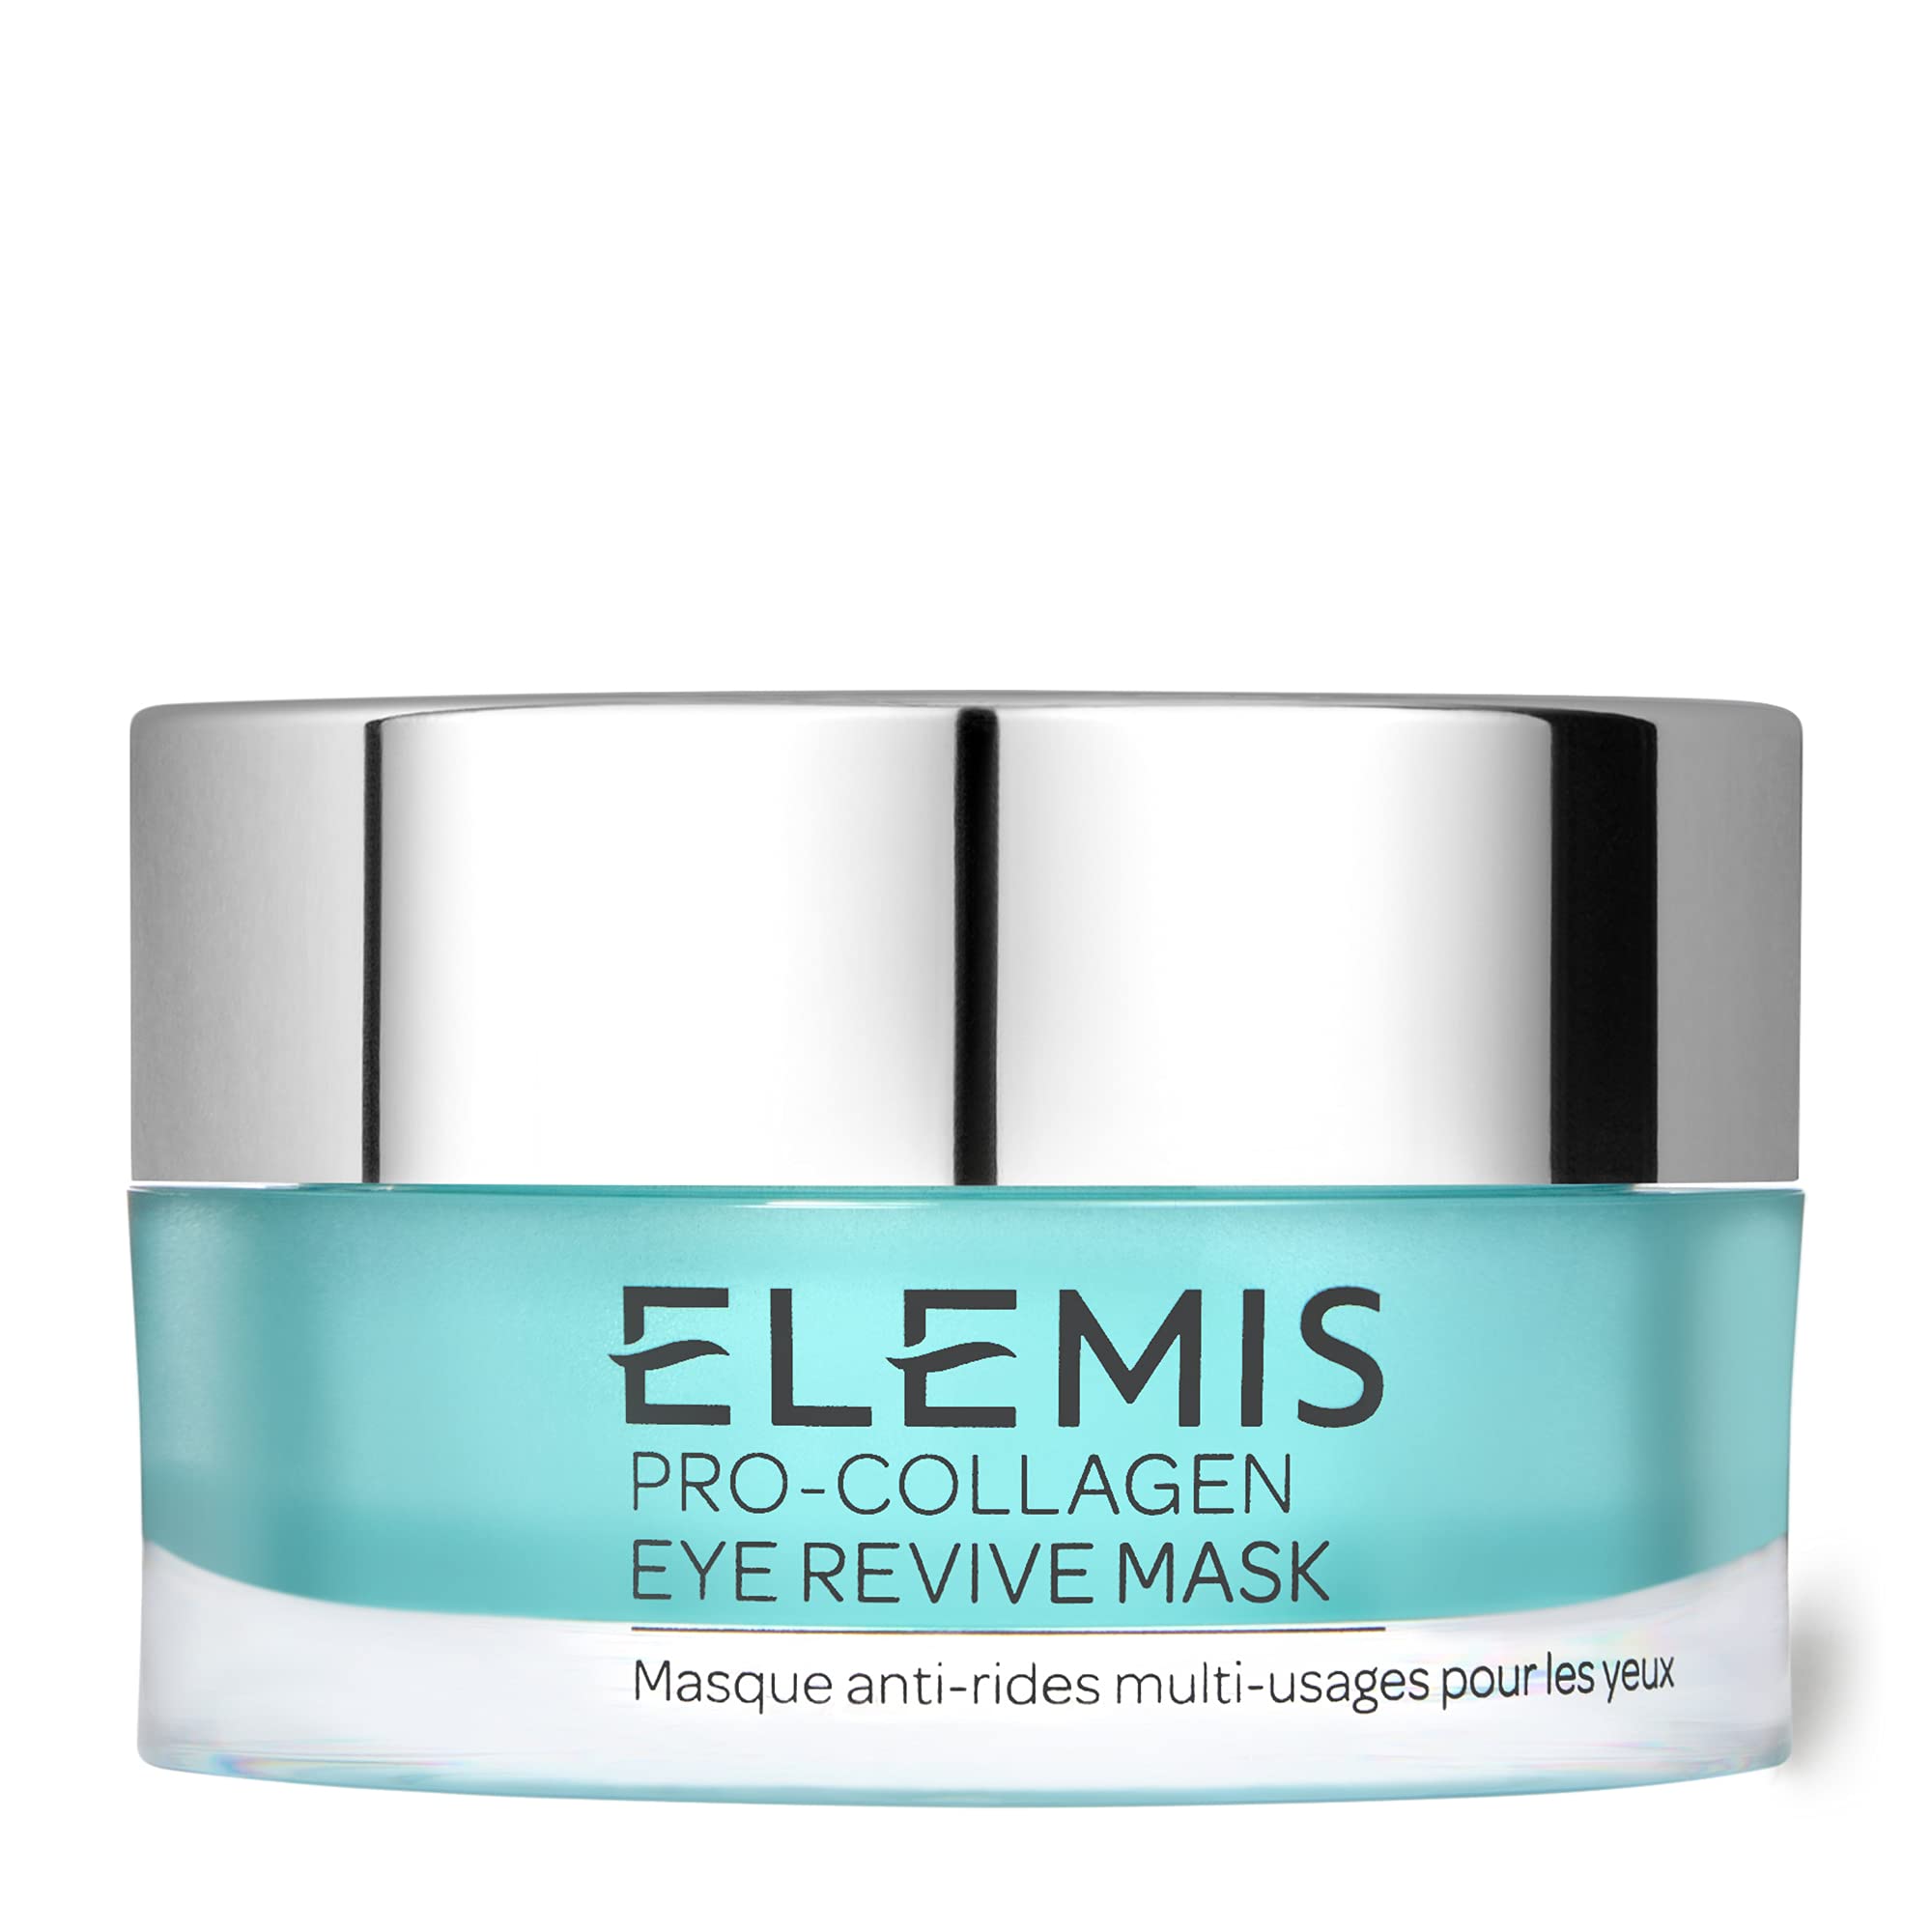 ELEMIS Pro-Collagen Eye Revive Mask | Anti-Wrinkle Multi-Use Treatment Brightens, Rejuvenates, Plumps and Hydrates for a More Youthful Look